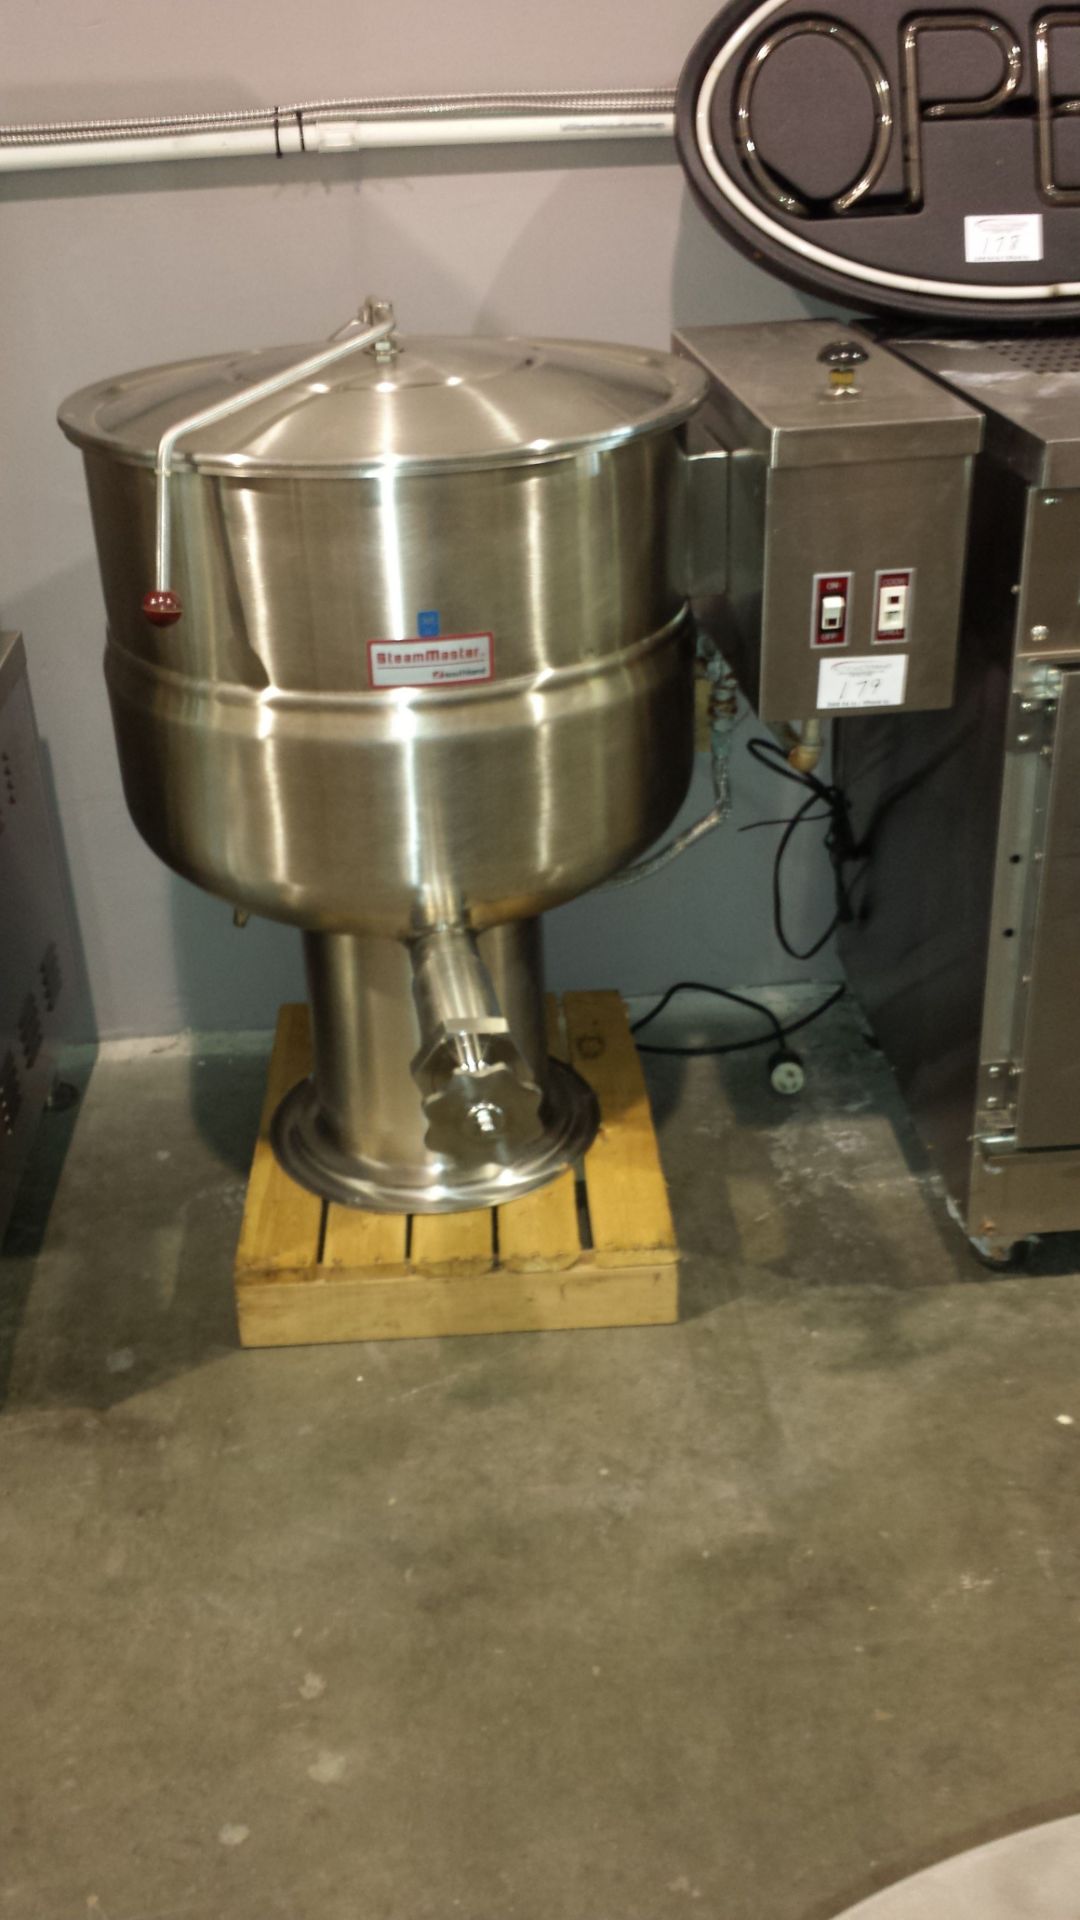 Southbend 40 gallon kettle with tangent run-off - appears have never been installed